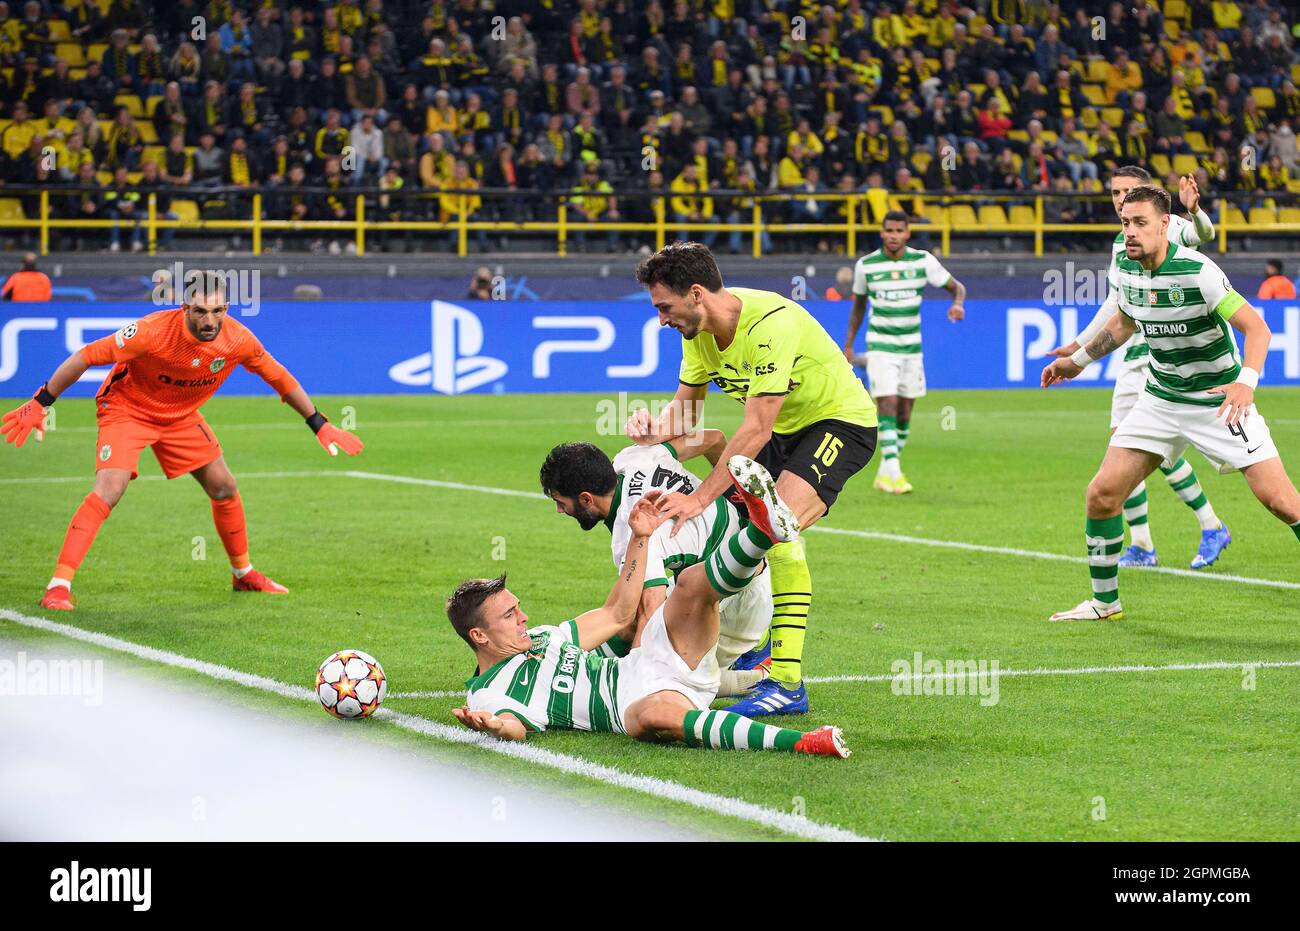 Mats HUMMELS (DO) in the duel versus left to right Joao PALHINHA (LIS), Luis NETO (LIS), action, duels, penalty area scene, Soccer Champions League, preliminary round 2nd matchday, Borussia Dortmund (DO) - Sporting Lisbon (LIS) 1: 0, on September 28th, 2021 in Dortmund/Germany. Â Stock Photo